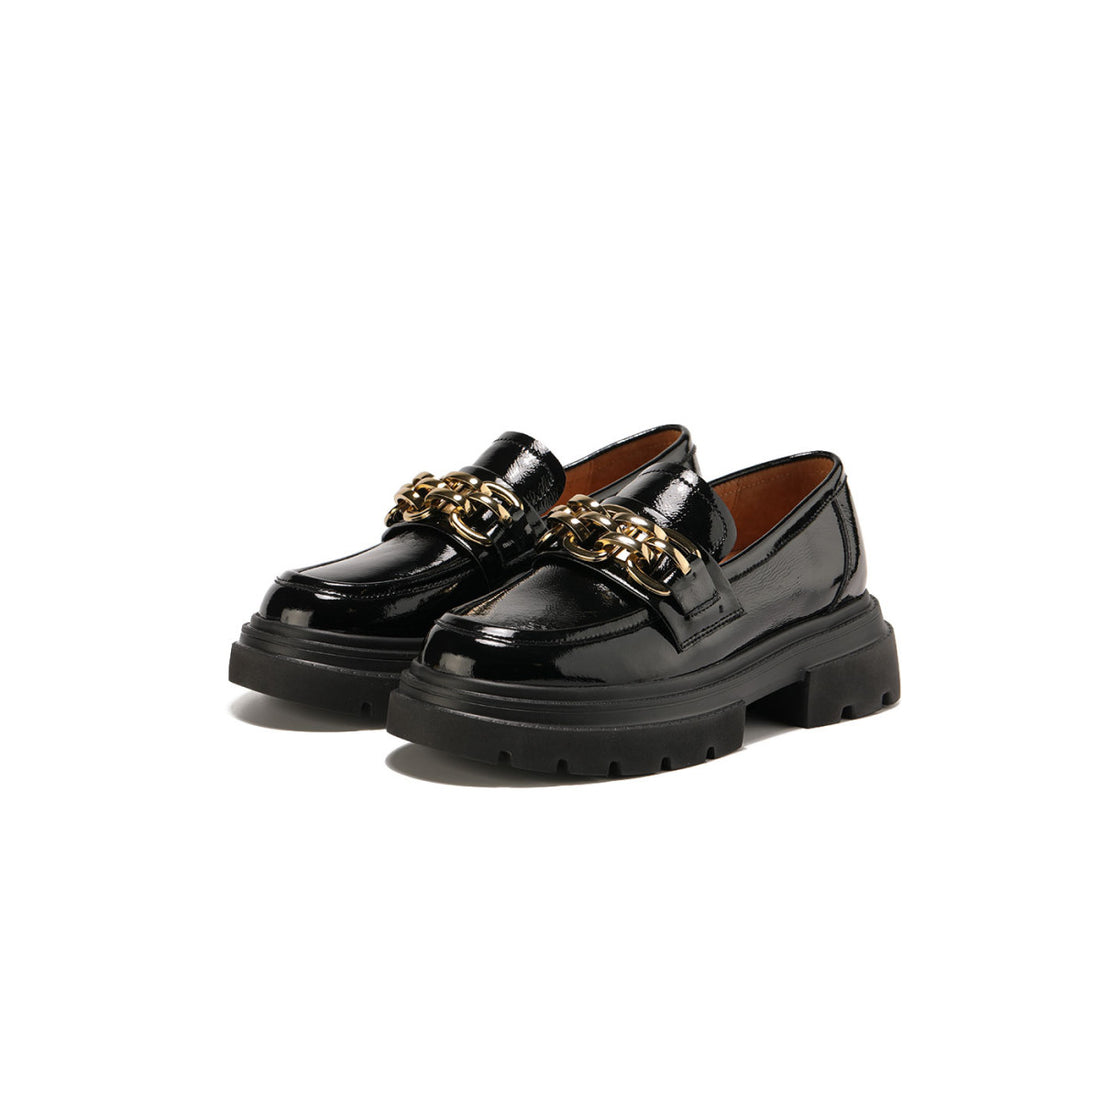 Chain-link Patent Black Loafers